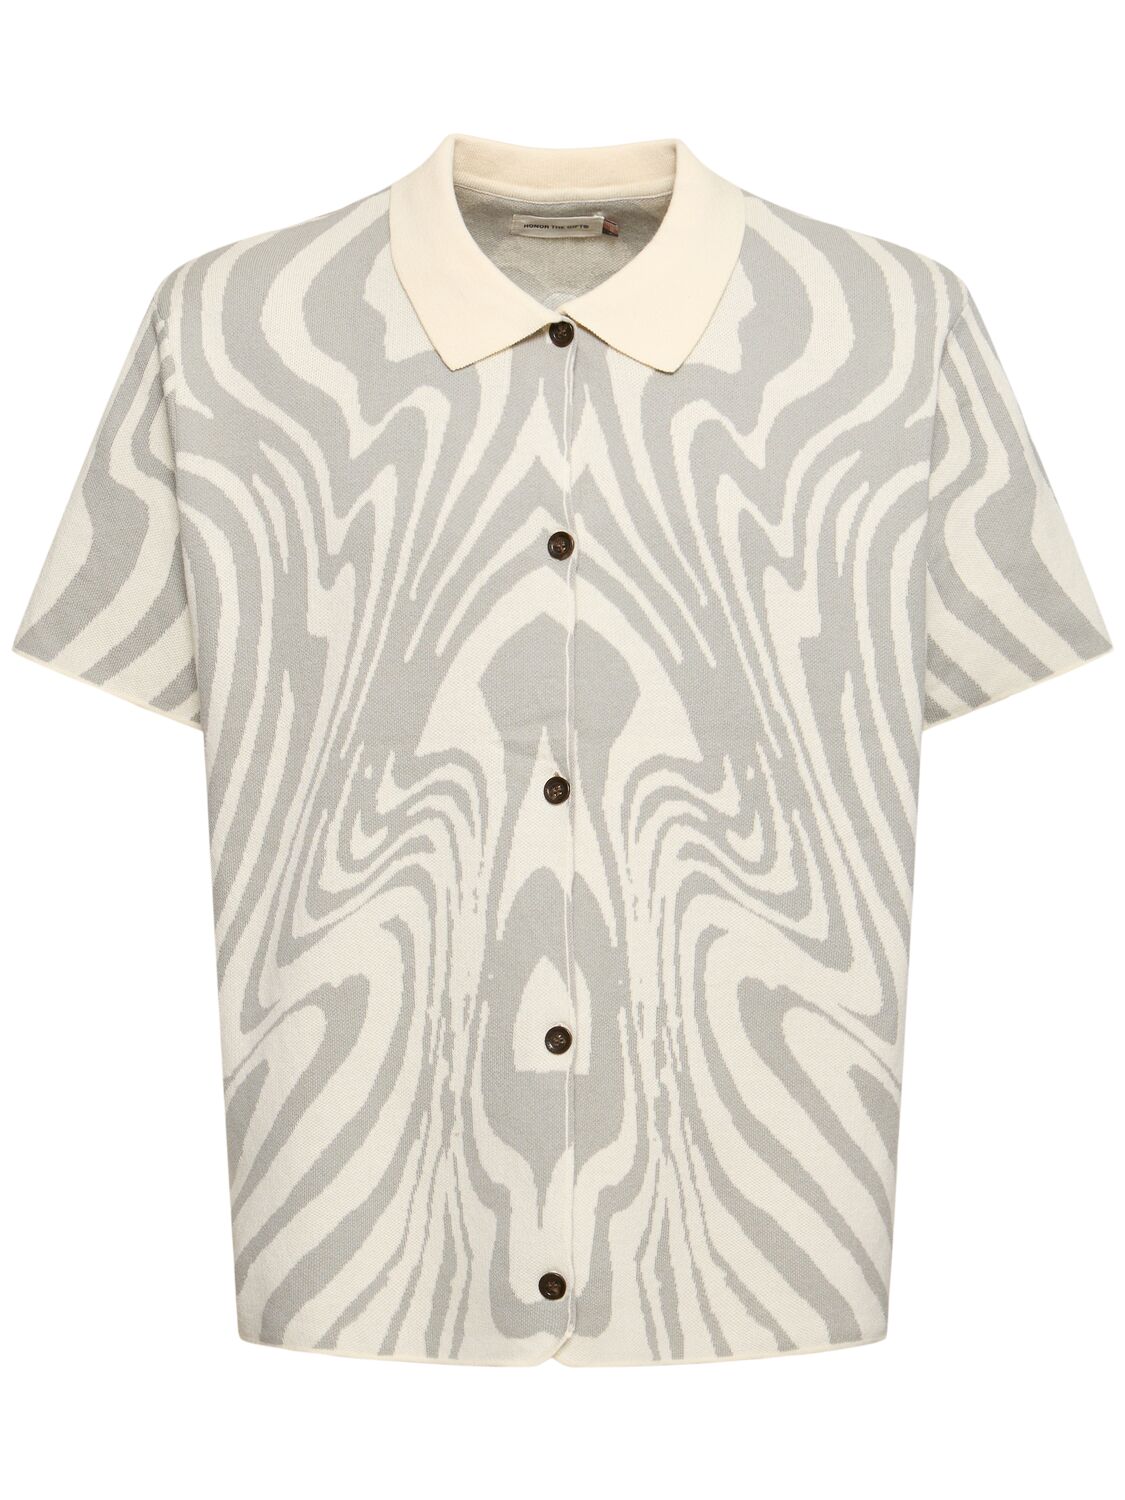 Honor The Gift A-spring Dazed Cotton Shirt In Bone